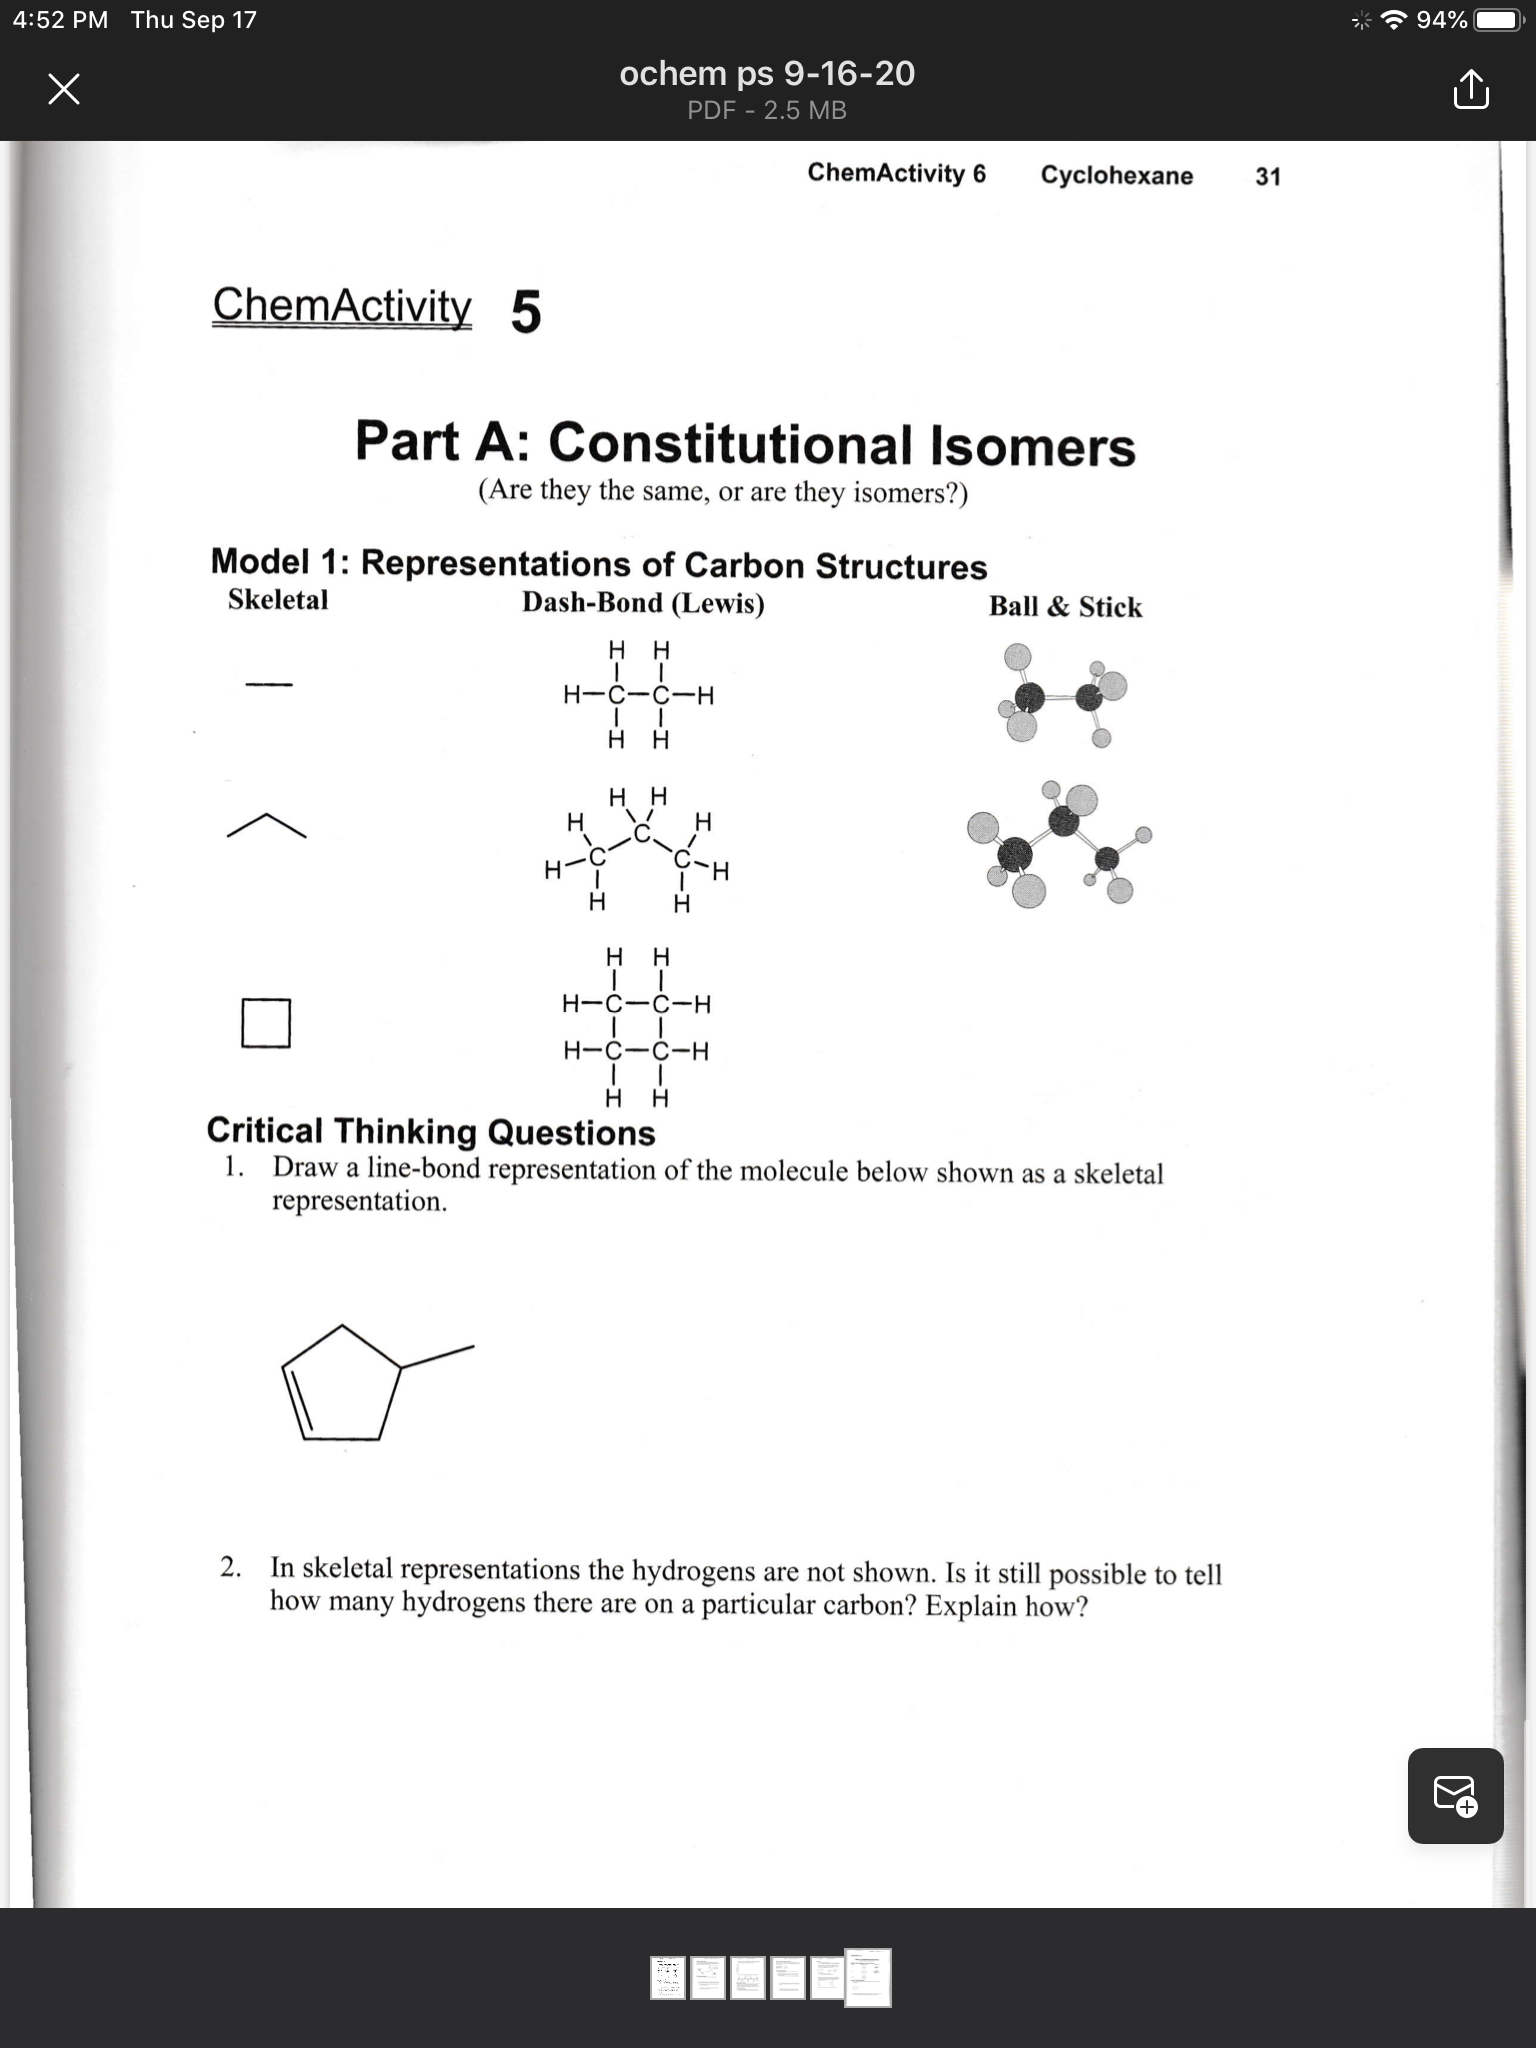 4:52 PM Thu Sep 17
94%
ochem ps 9-16-20
PDF - 2.5 MB
ChemActivity 6
Cyclohexane
31
ChemActivity 5
Part A: Constitutional Isomers
(Are they the same, or are they isomers?)
Model 1: Representations of Carbon Structures
Dash-Bond (Lewis)
Skeletal
Ball & Stick
H H
H-C-C-H
нн
нн
H
H-C
%23
H-C-C-H
Н-с—с-н
H
Critical Thinking Questions
1. Draw a line-bond representation of the molecule below shown as a skeletal
representation.
2. In skeletal representations the hydrogens are not shown. Is it still possible to tell
how many hydrogens there are on a particular carbon? Explain how?
